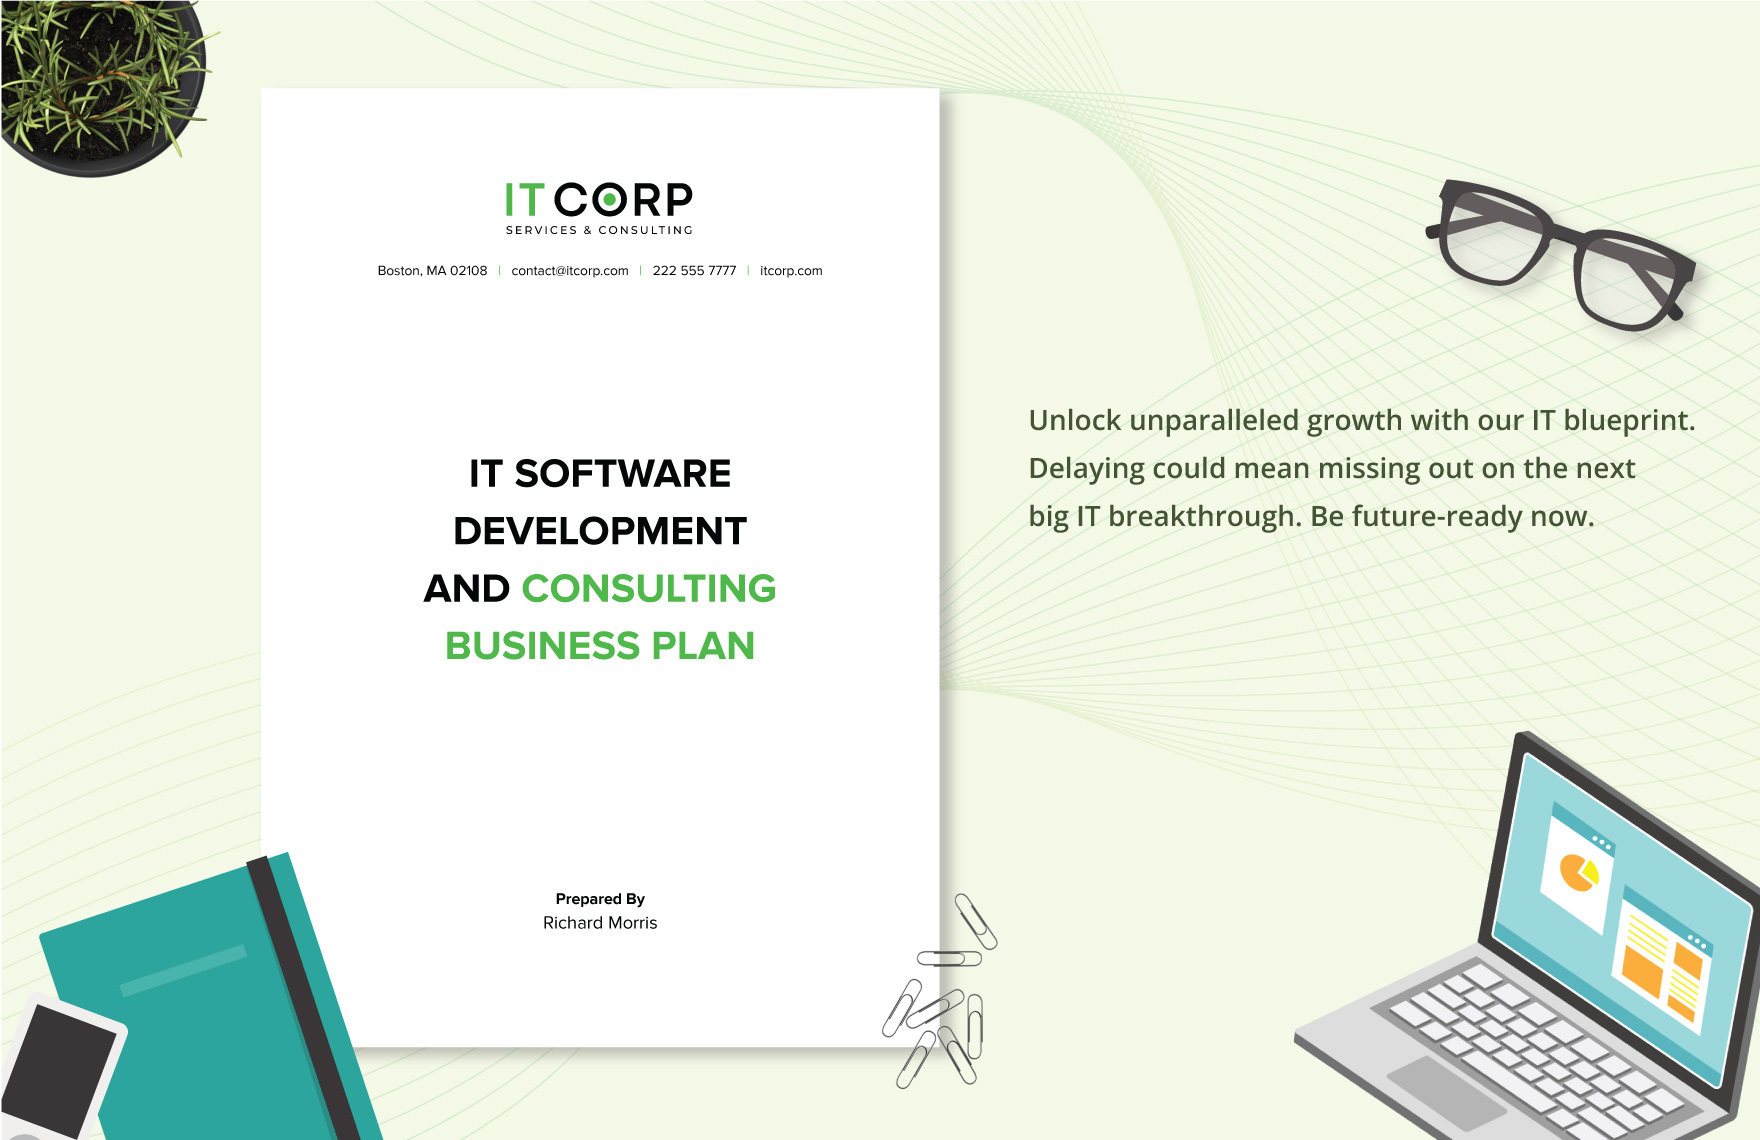 IT Software Development & Consulting Business Plan Template